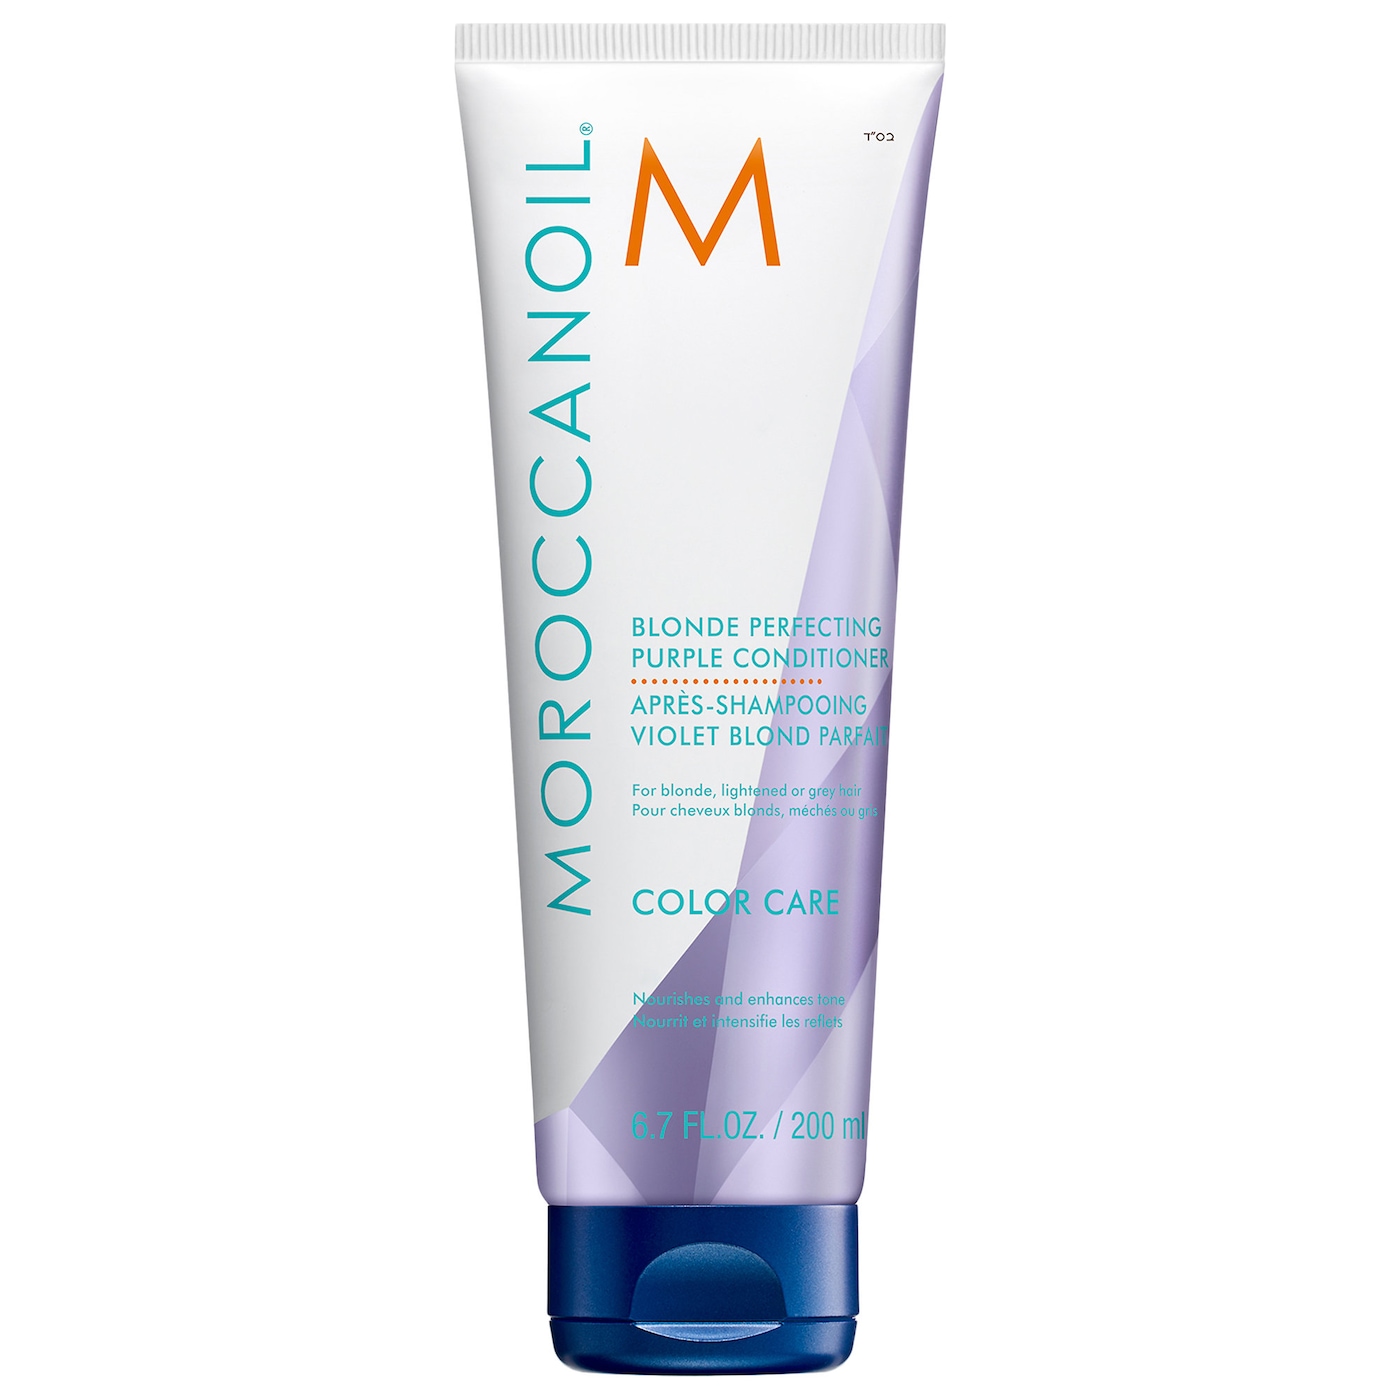 moroccanoil blonde perfecting purple conditioner, one of the best conditioners for gray hair